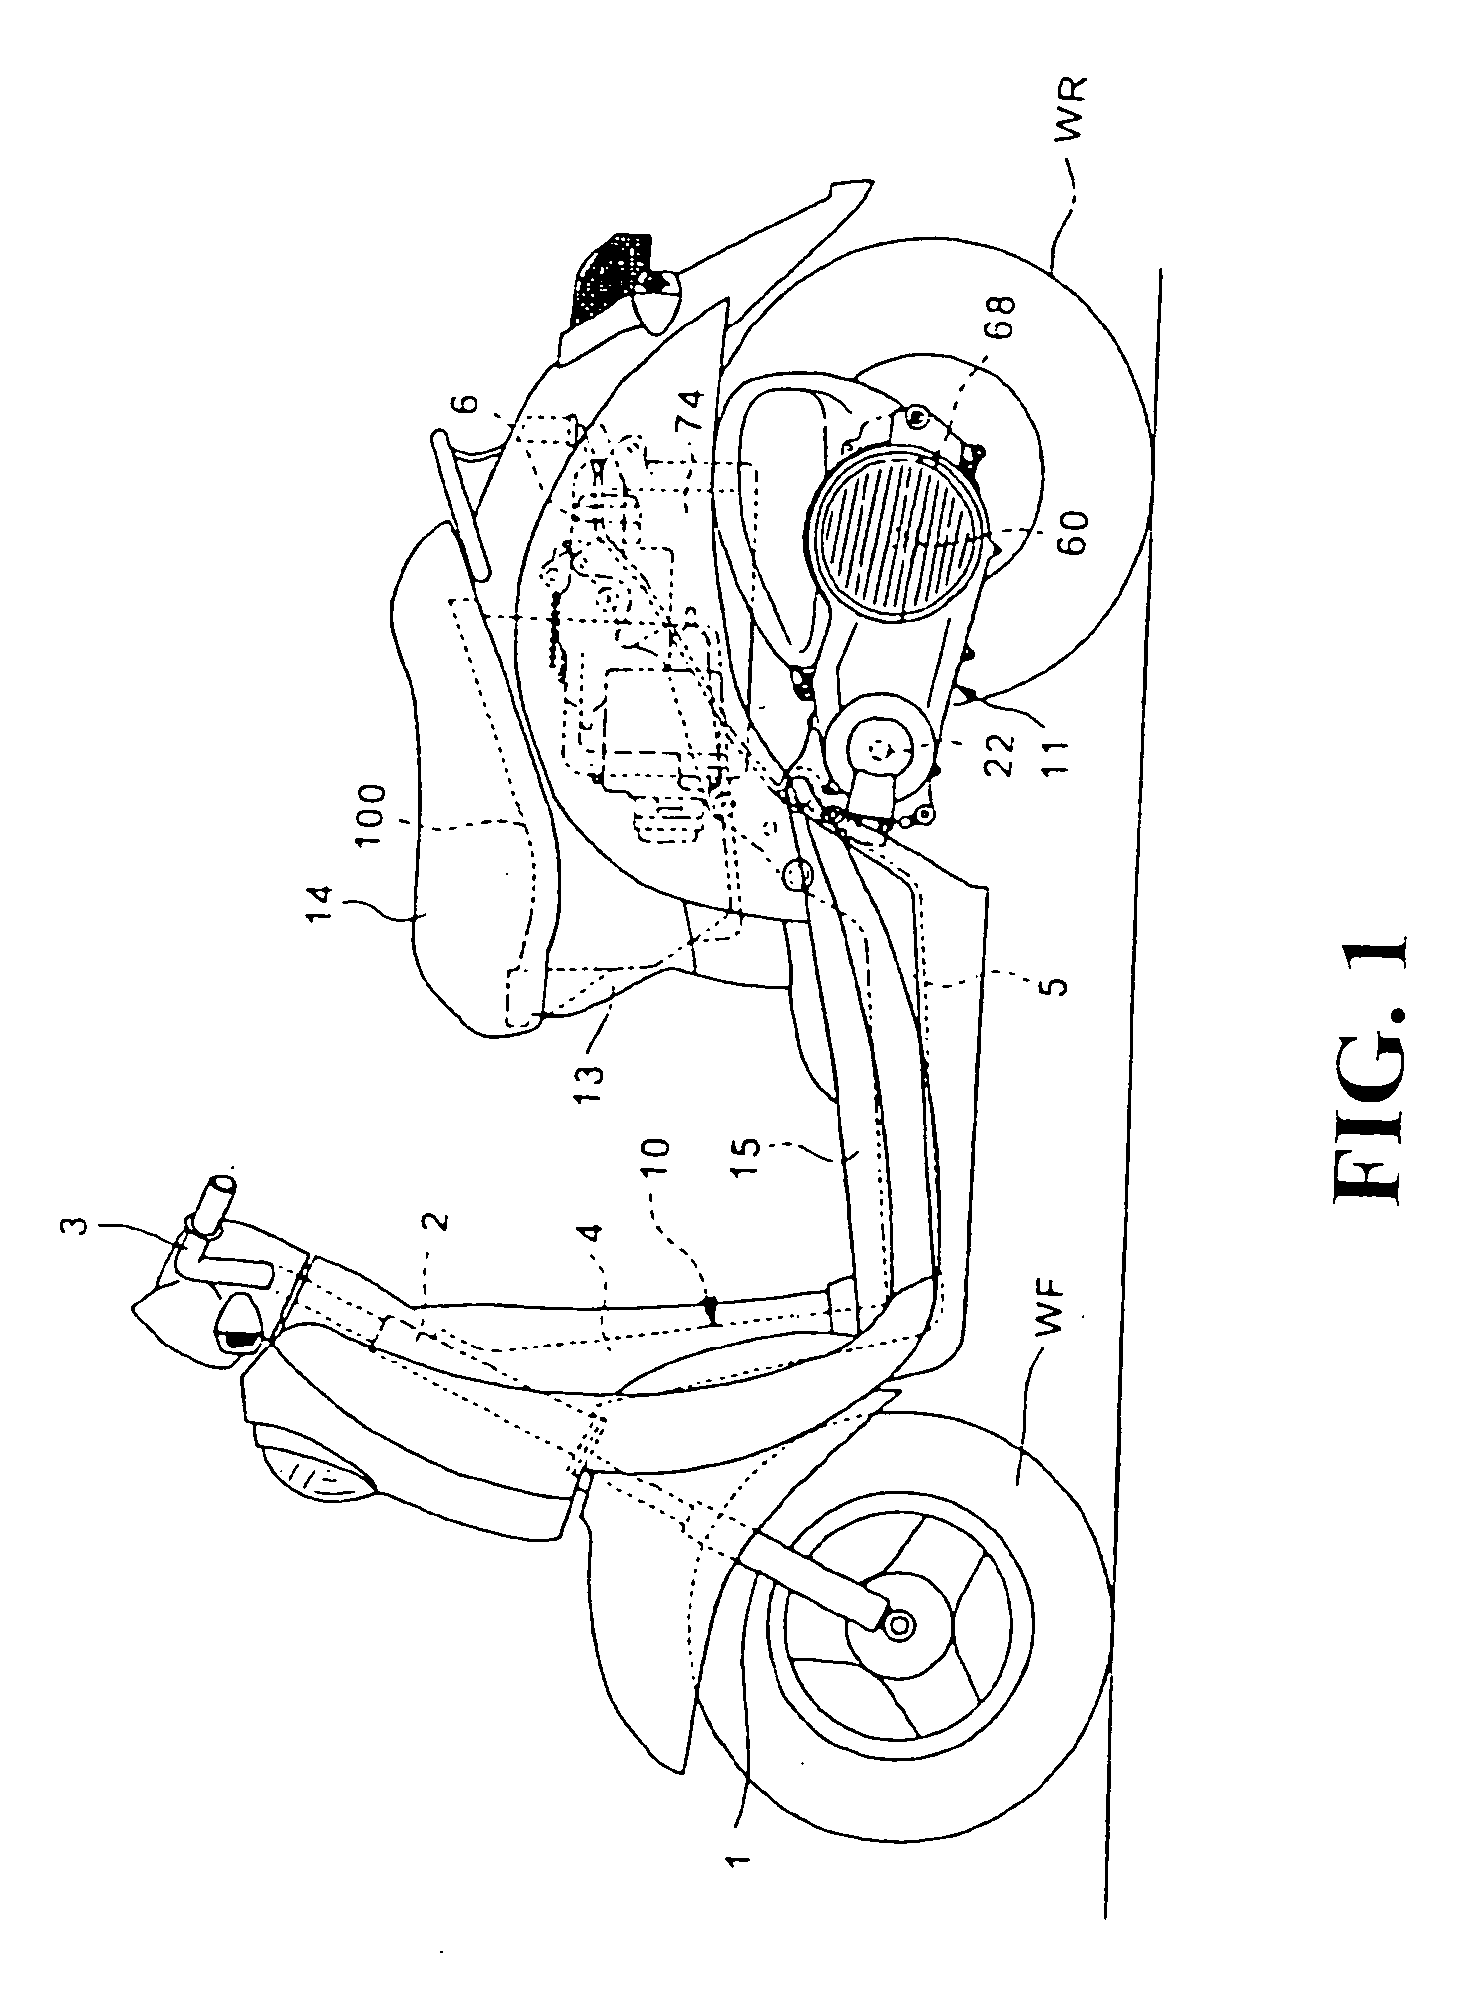 Motor cooling structure for electric vehicle